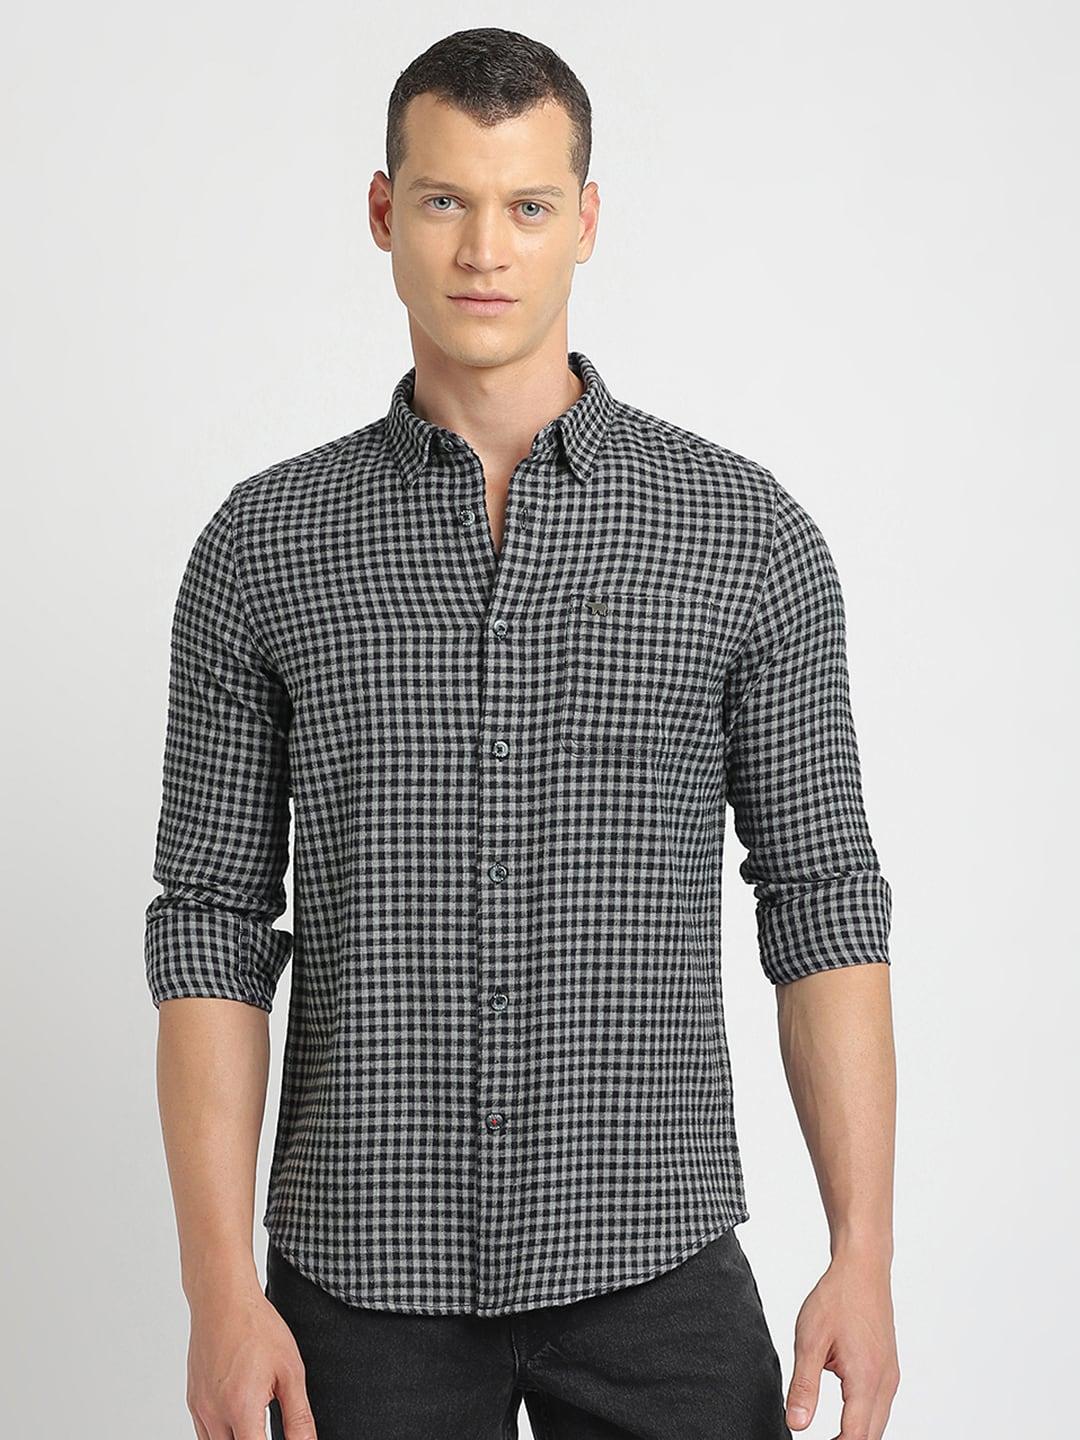 the-bear-house-slim-fit-tartan-checked-casual-pure-cotton-shirt